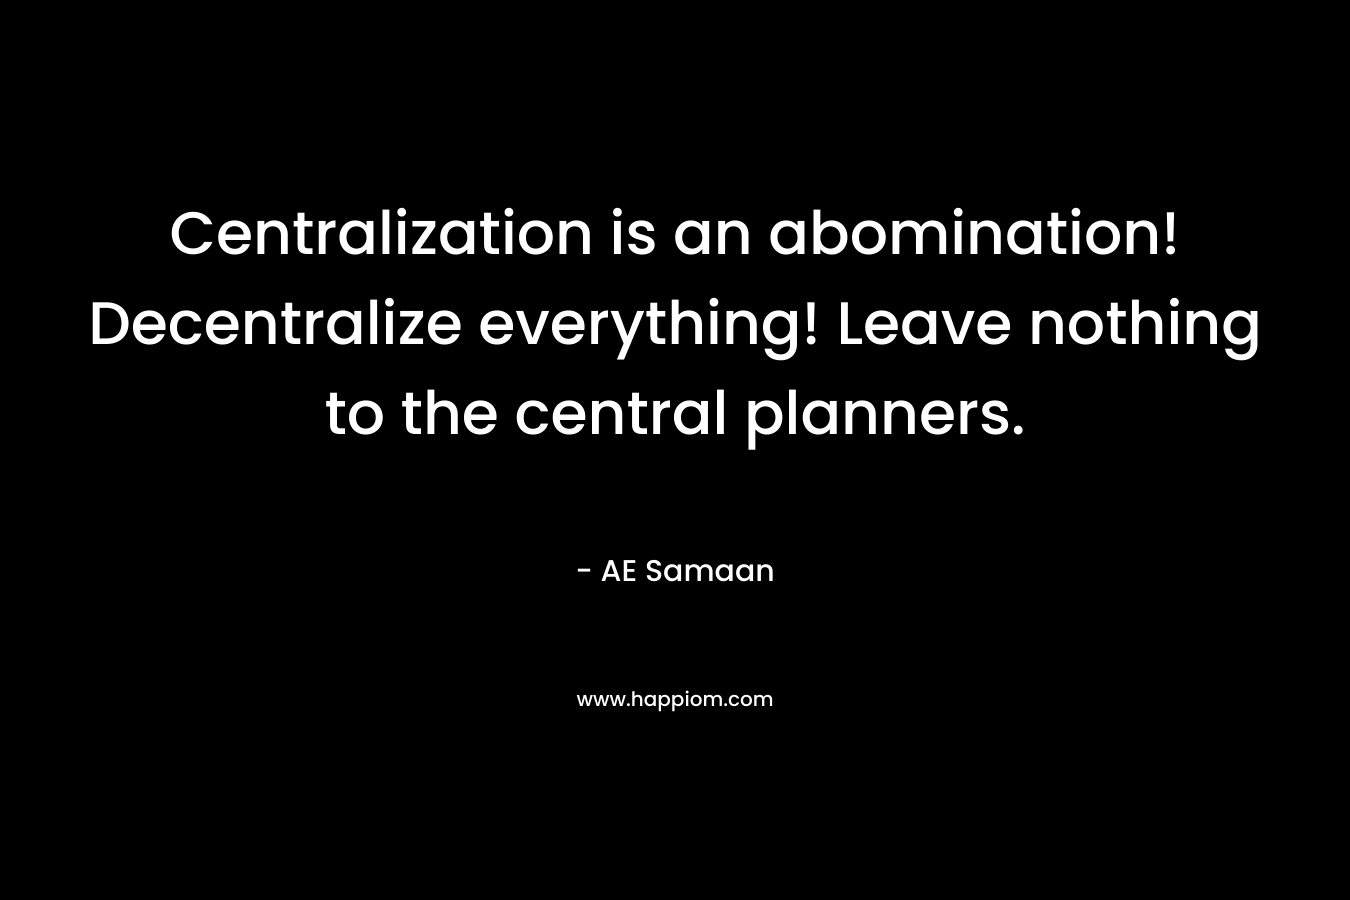 Centralization is an abomination! Decentralize everything! Leave nothing to the central planners. – AE Samaan